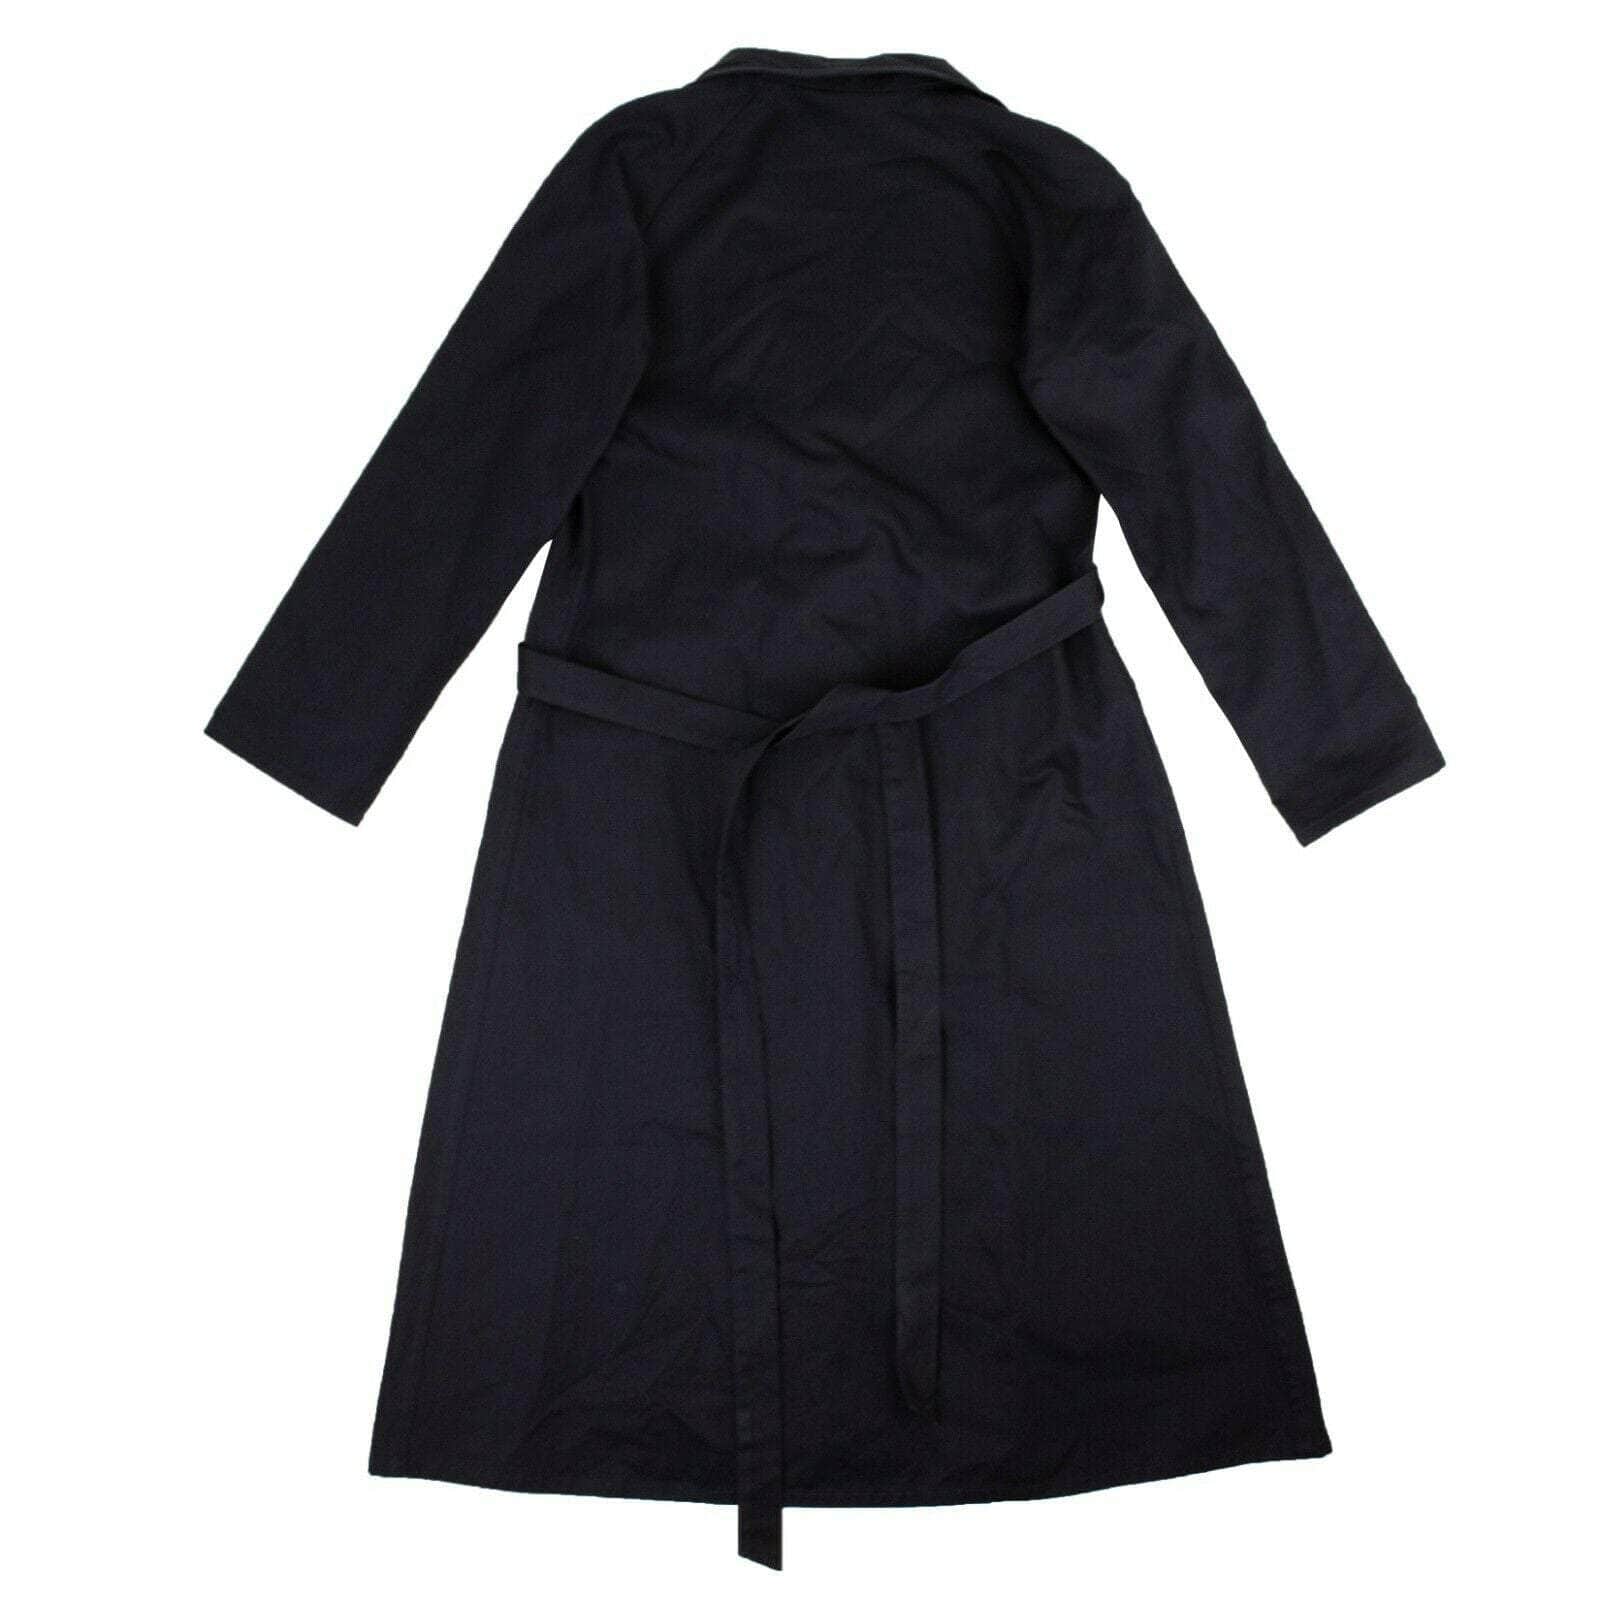 A_PLAN_APPLICATION 250-500, a_plan_application, channelenable-all, couponcollection, gender-womens, main-clothing, size-s S Navy Blue Belted Wrap Dress 82NGG-AP-7/S 82NGG-AP-7/S